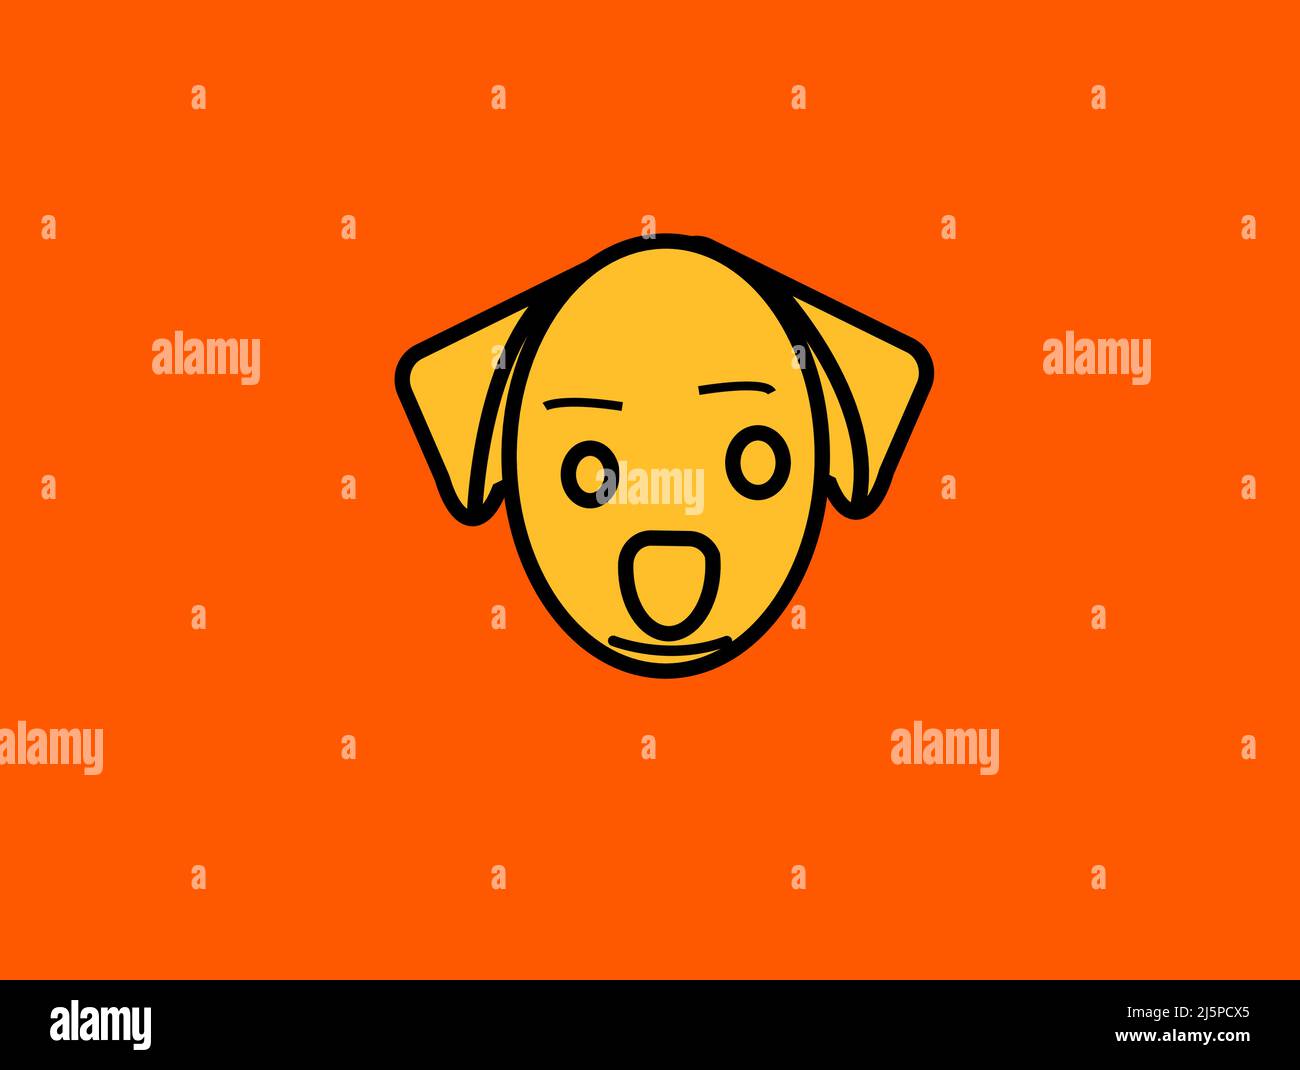 Canine face Stock Vector Images - Alamy